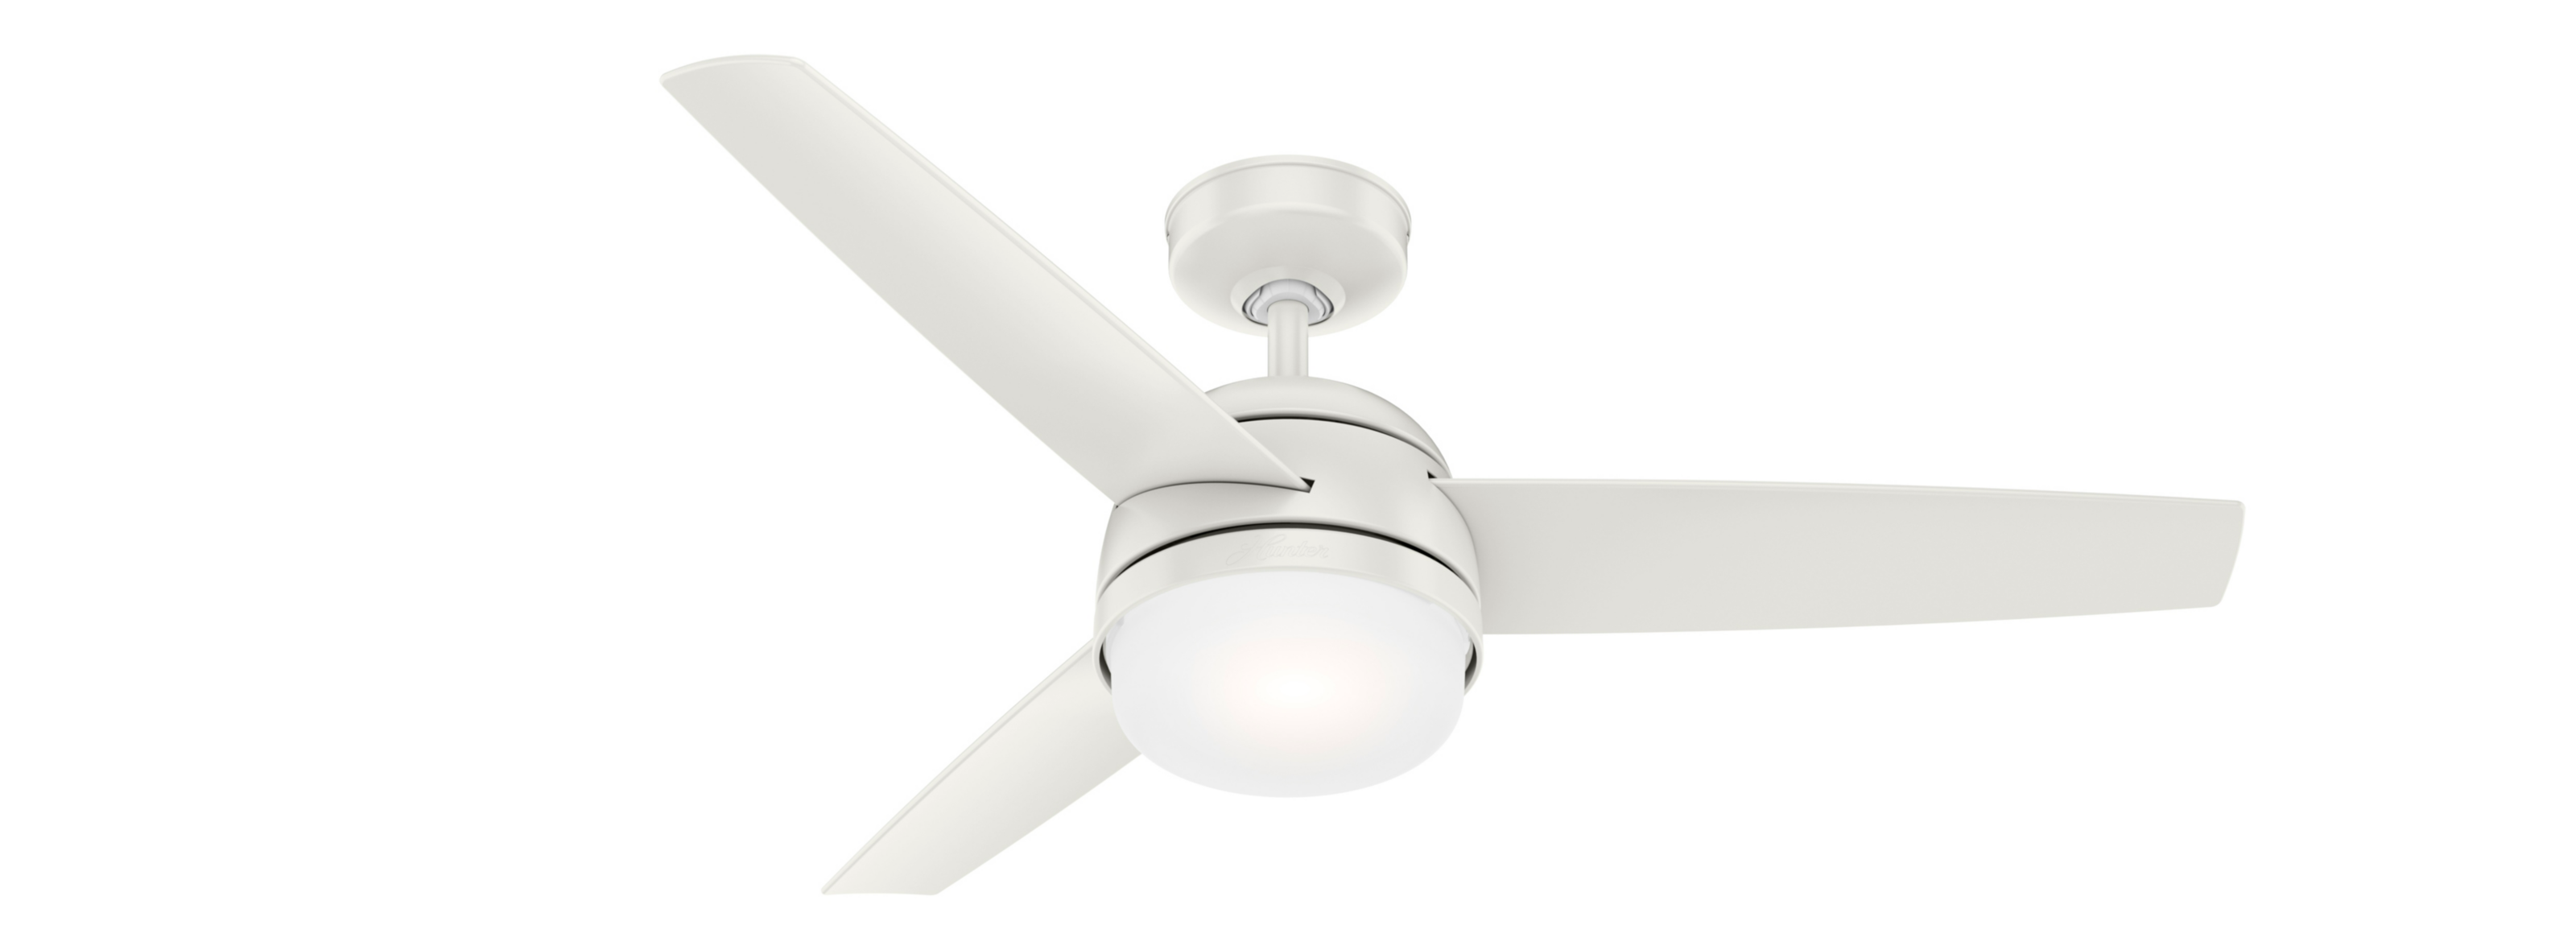 Hunter 48 inch Midtown Ceiling Fan with LED Light Kit and Handheld Remote Ceiling Fan Hunter   